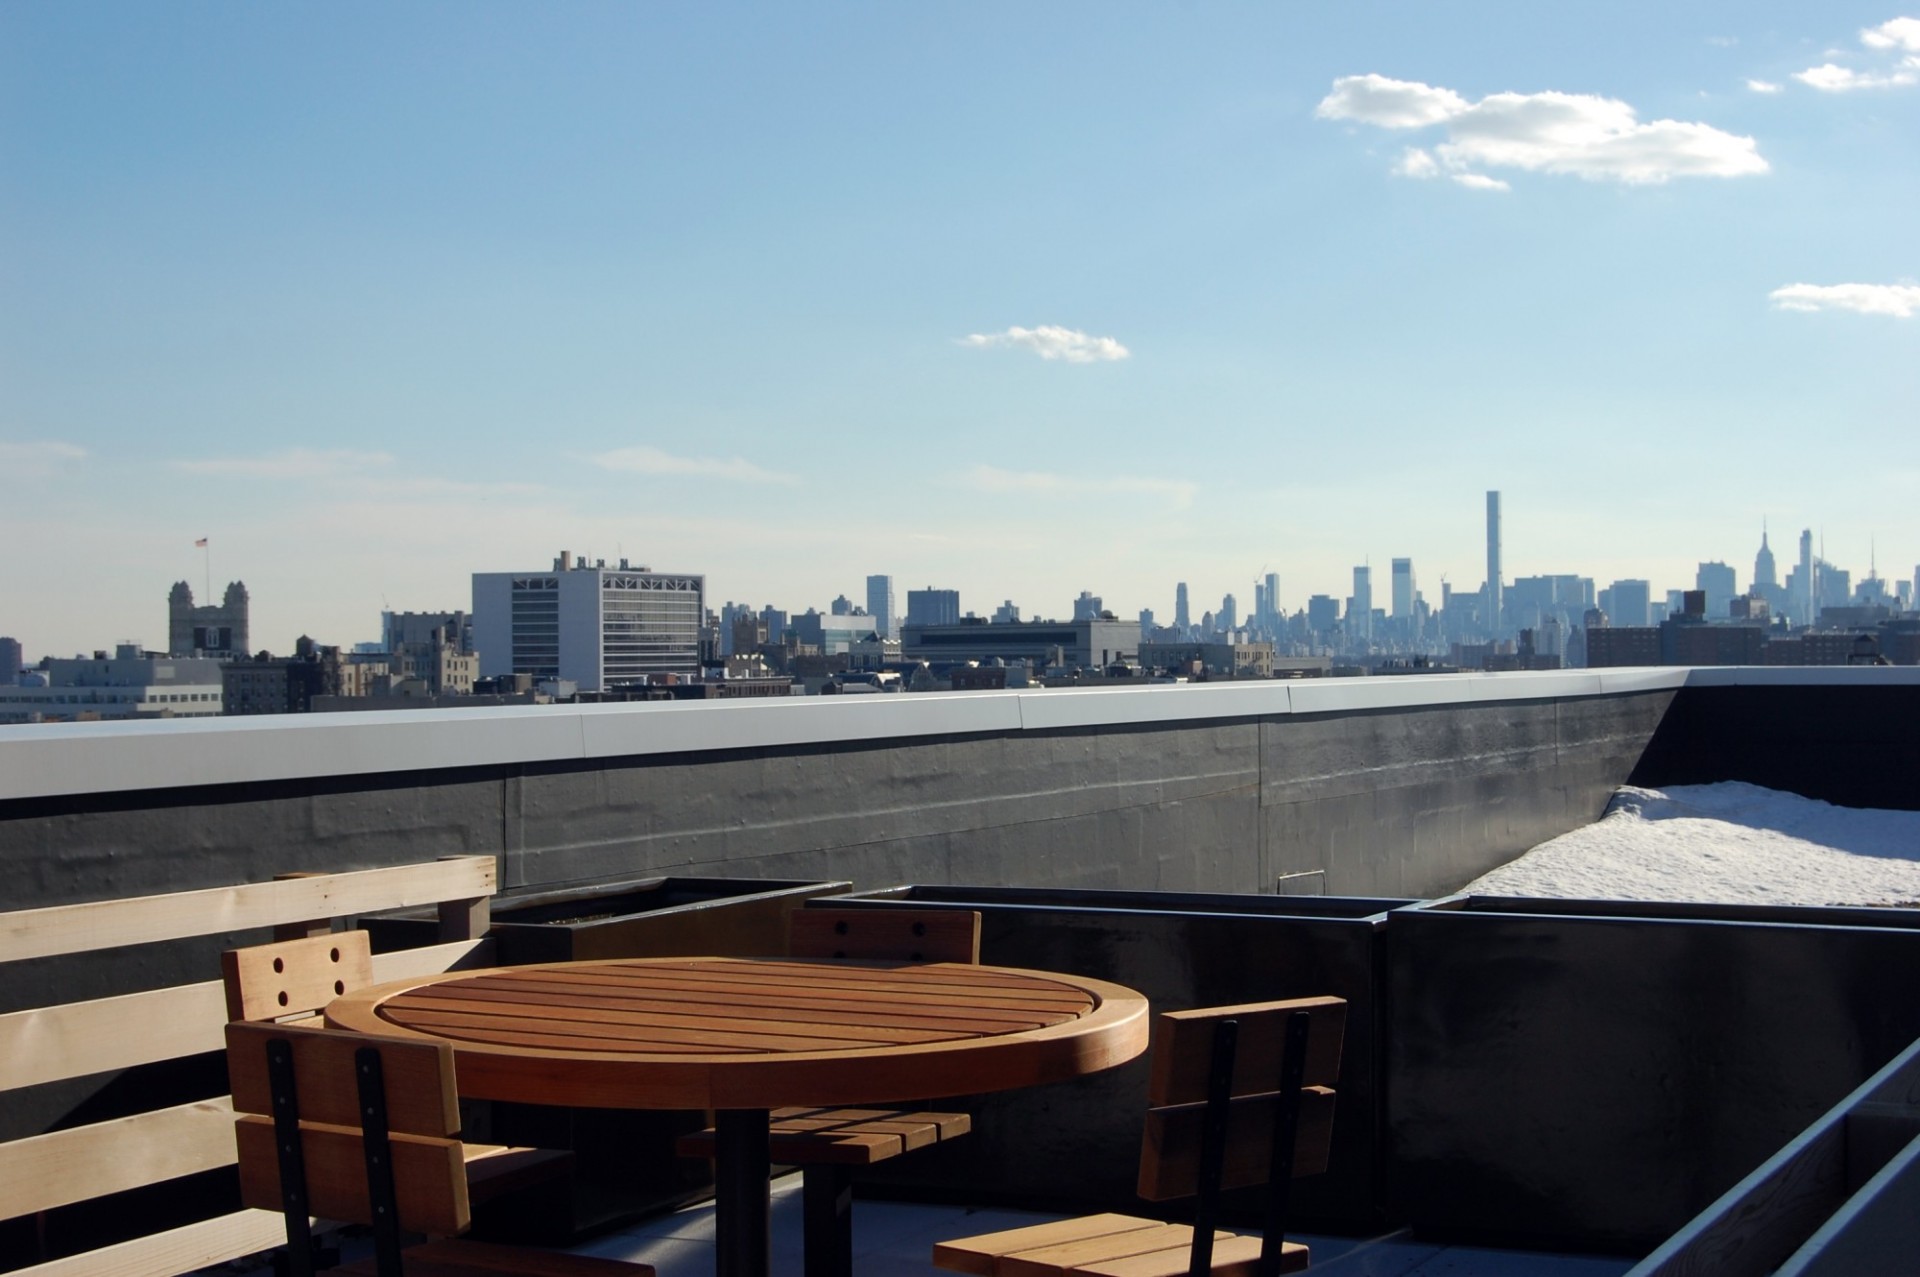 A round wooden table and chairs on the rooftop of 3595 Broadway with the Manhattan skyline in background.